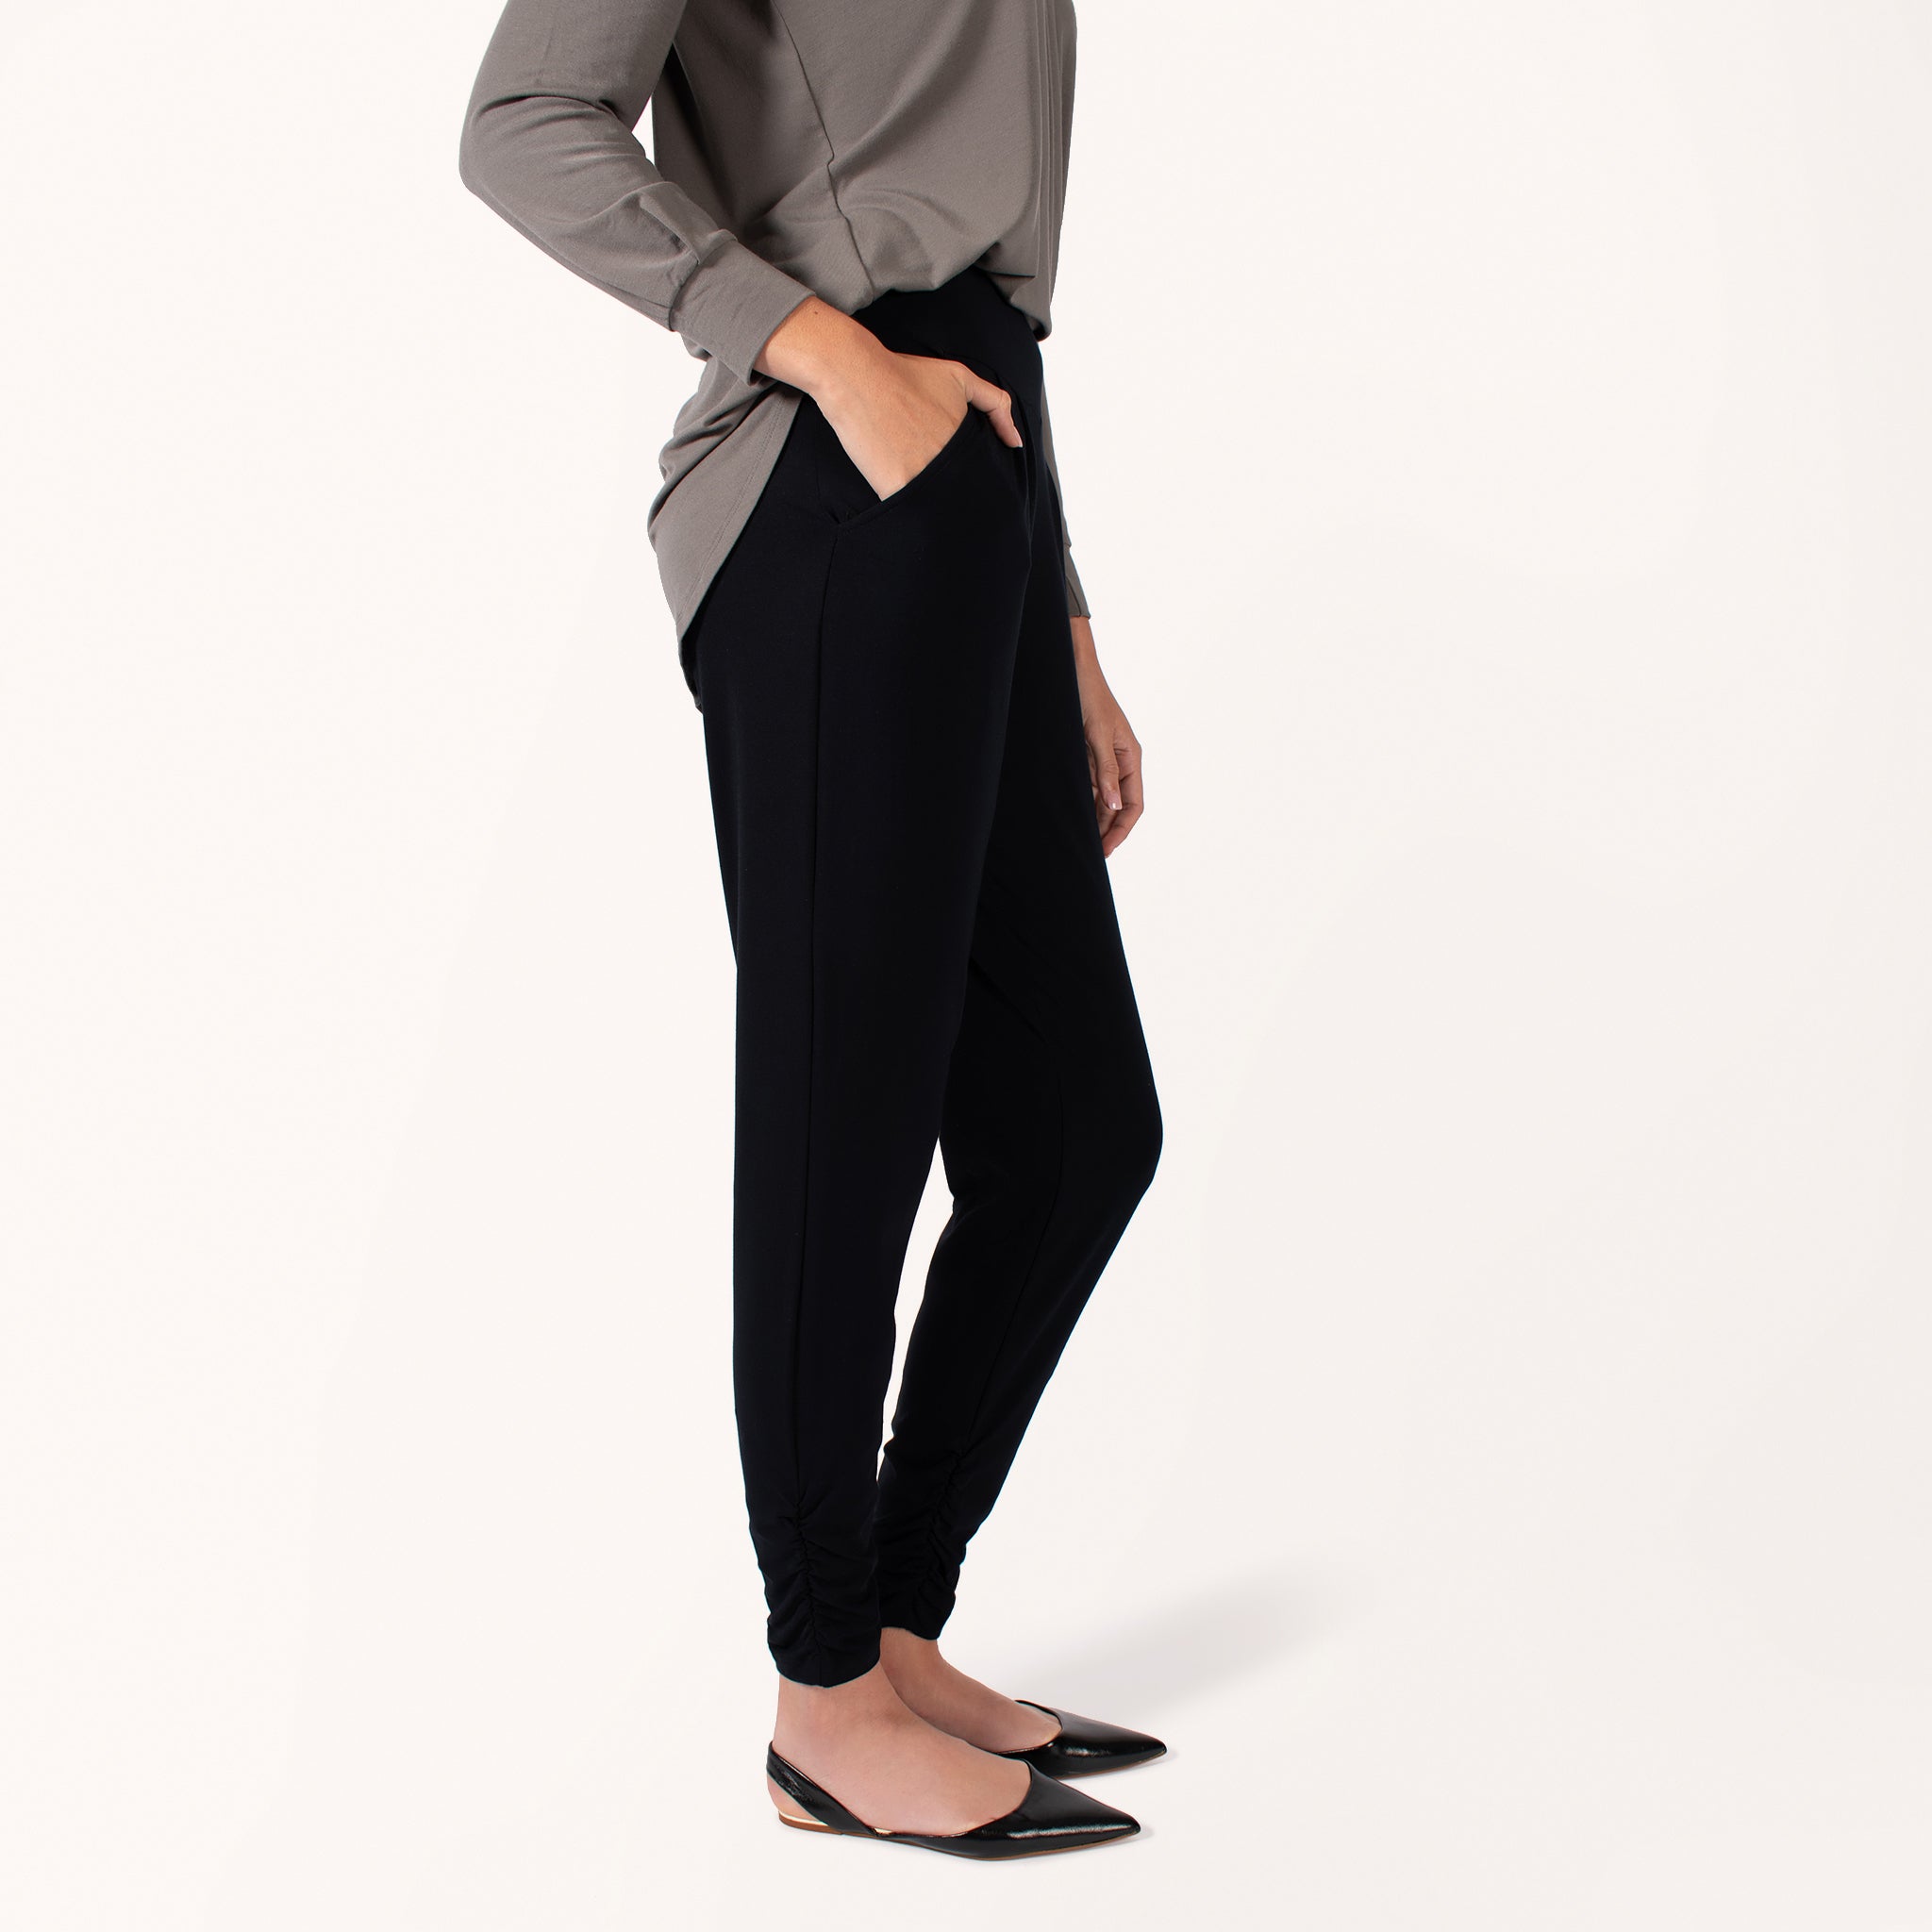 The Dressy Sweatsuit – Encircled